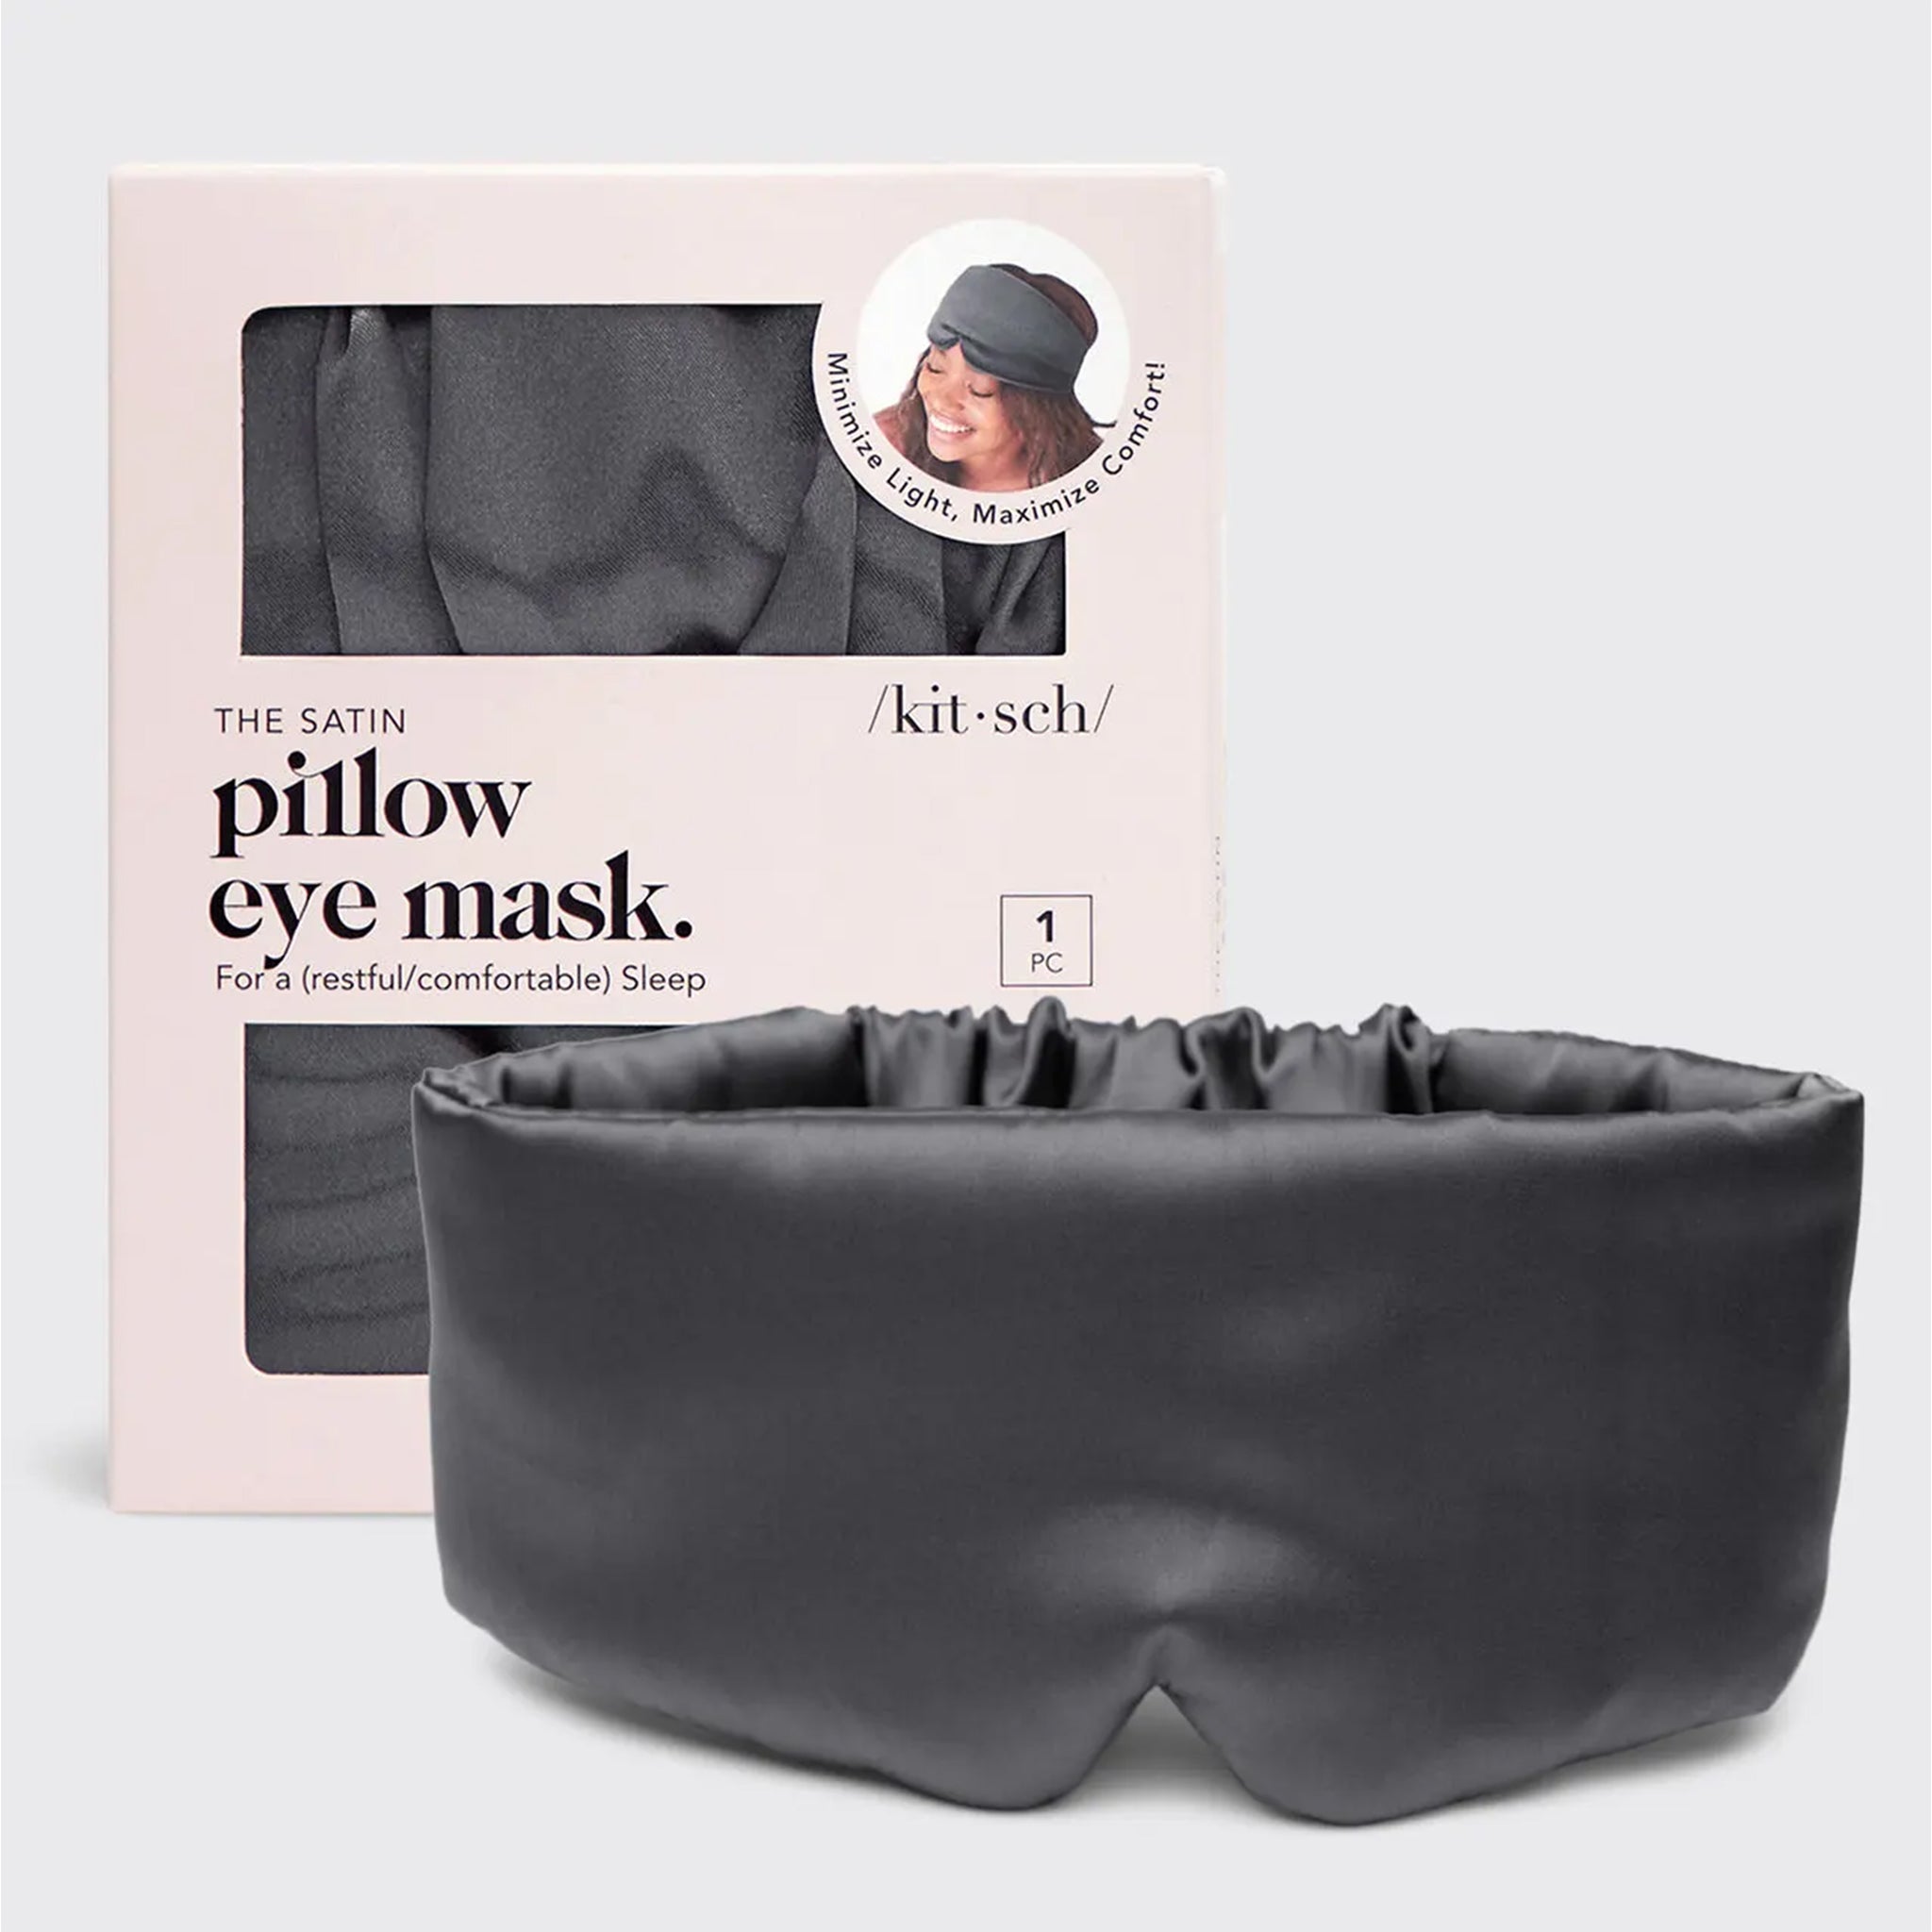 A charcoal grey satin sleeping eye mask that is slightly padded.